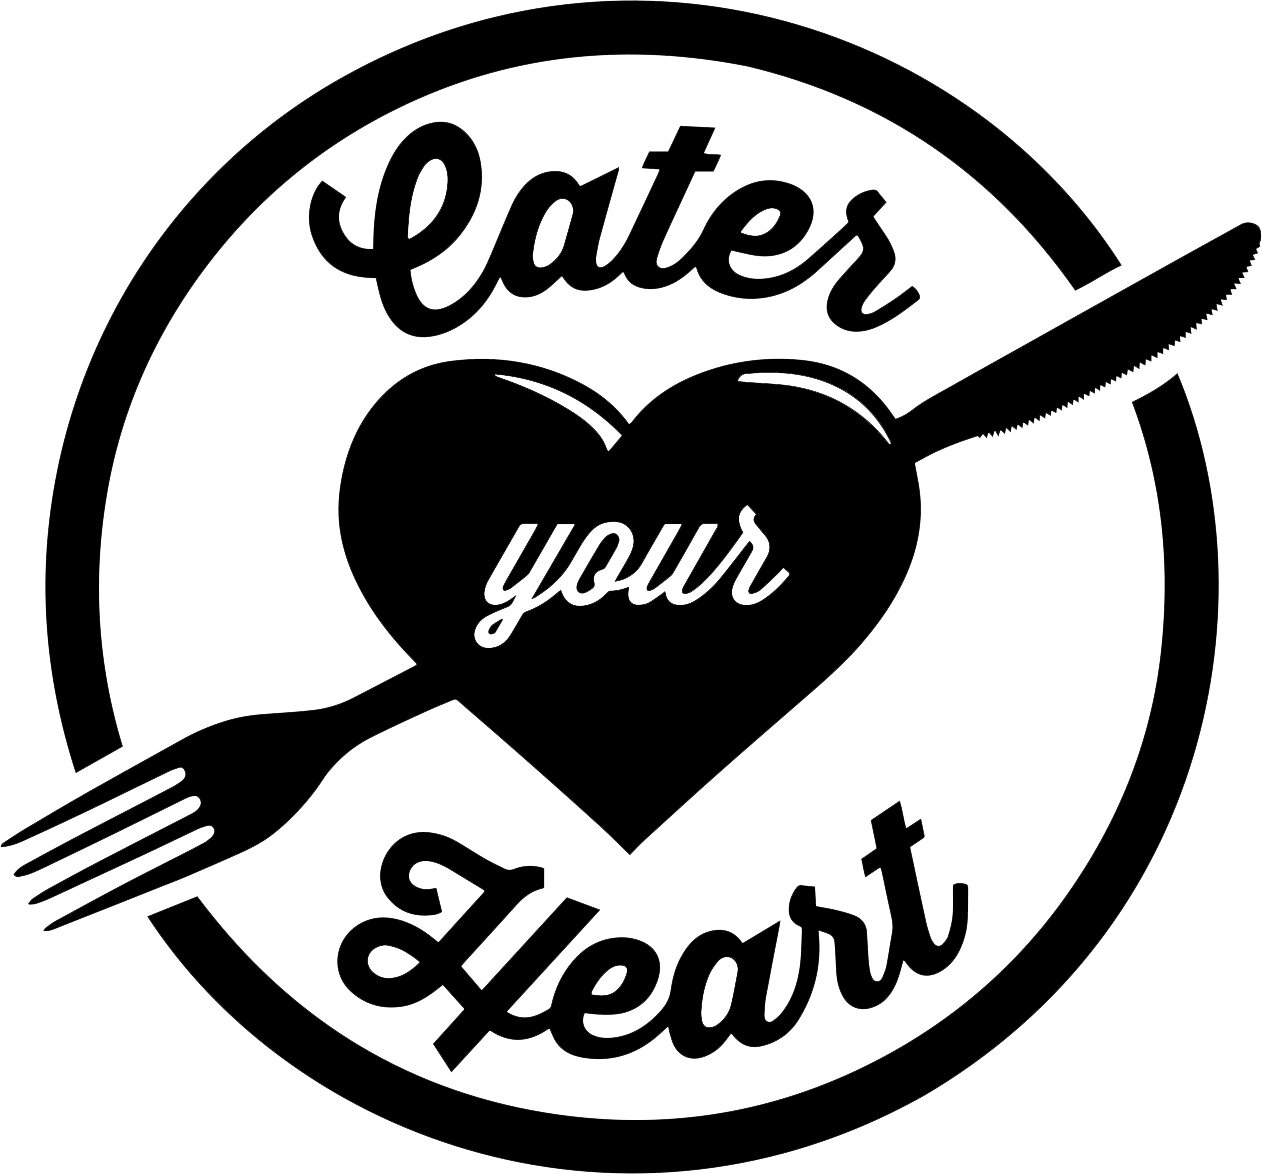 Cater Your Heart